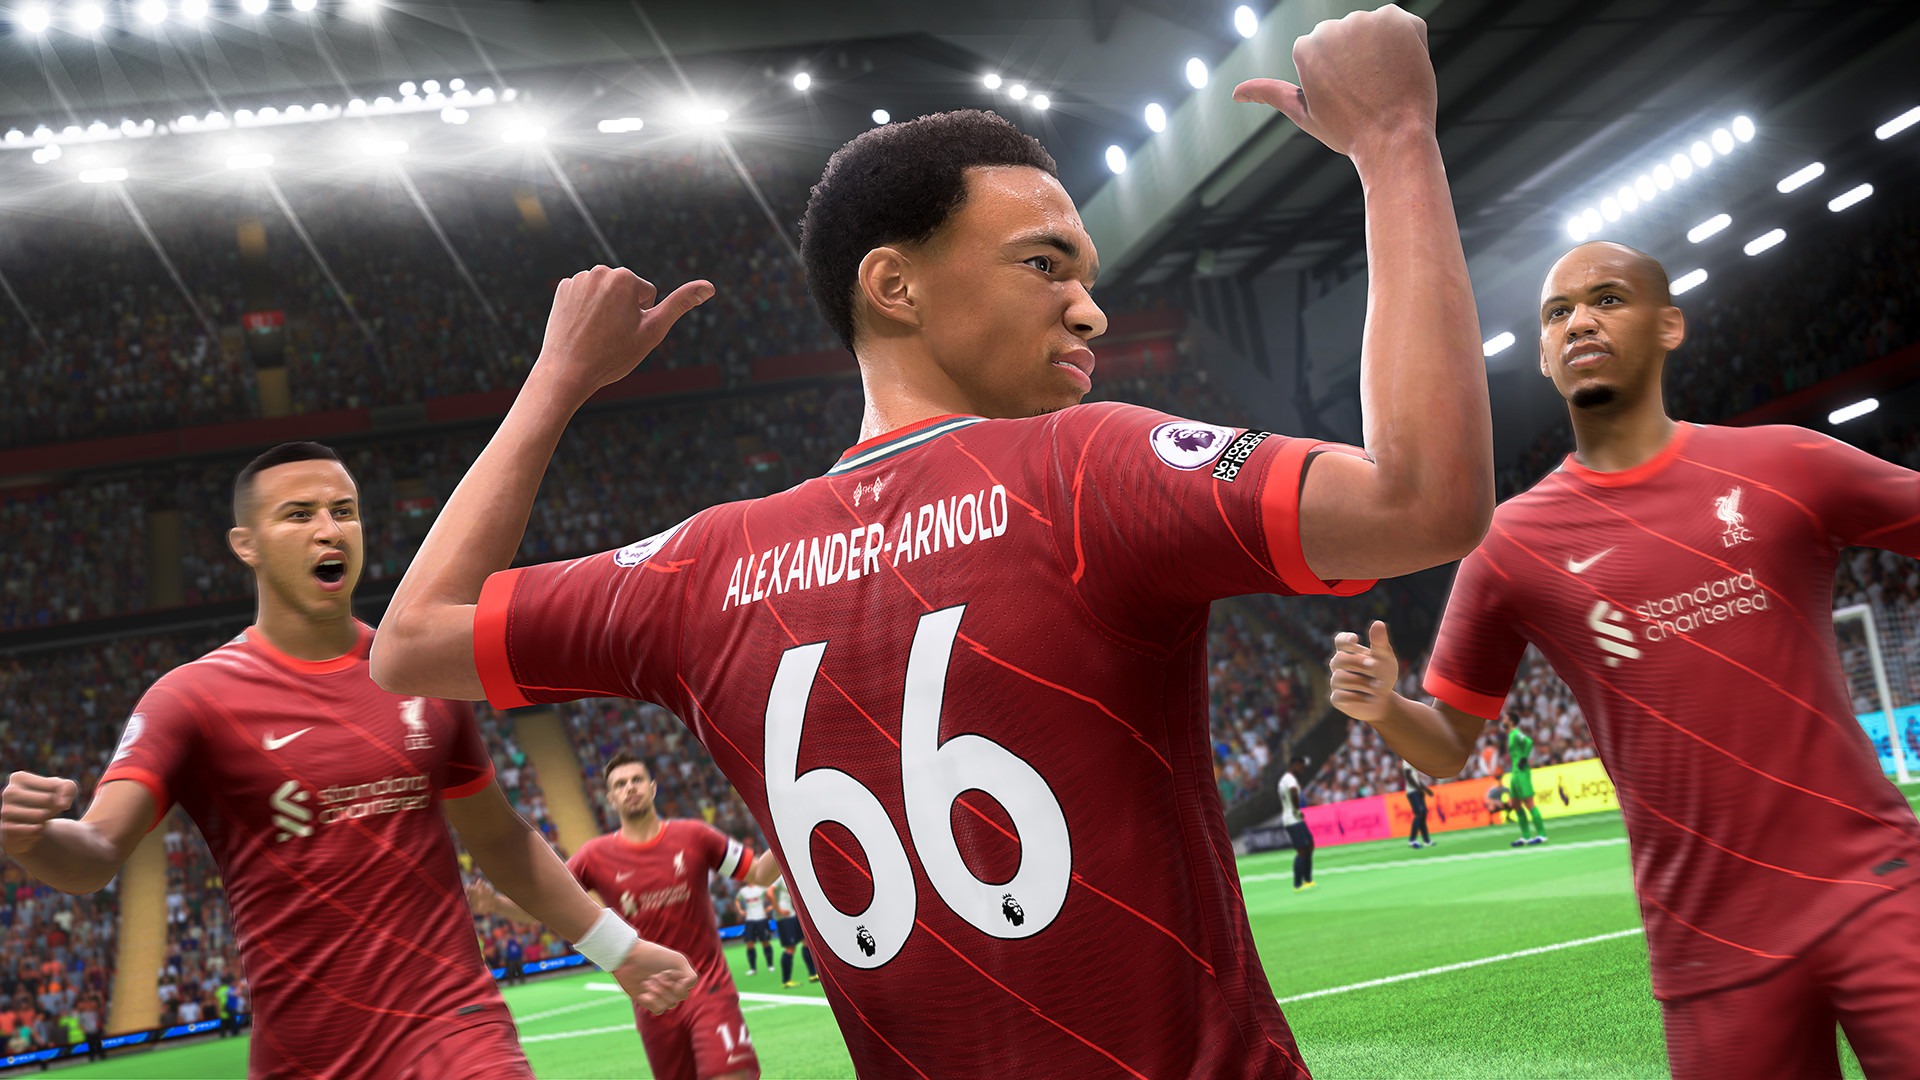 Why you should buy FIFA 22 on PC. 